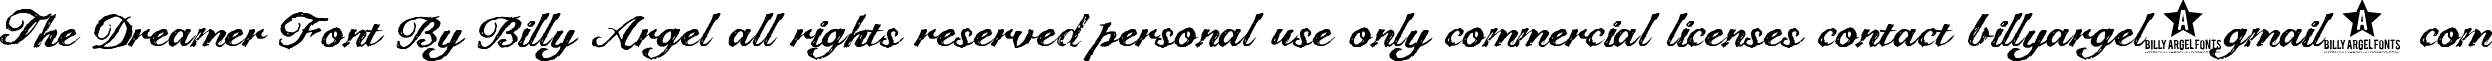 The Dreamer Font By Billy Argel all rights reserved personal use only commercial licenses contact billyargel@gmail. com font - THEDREAM TRIAL.ttf